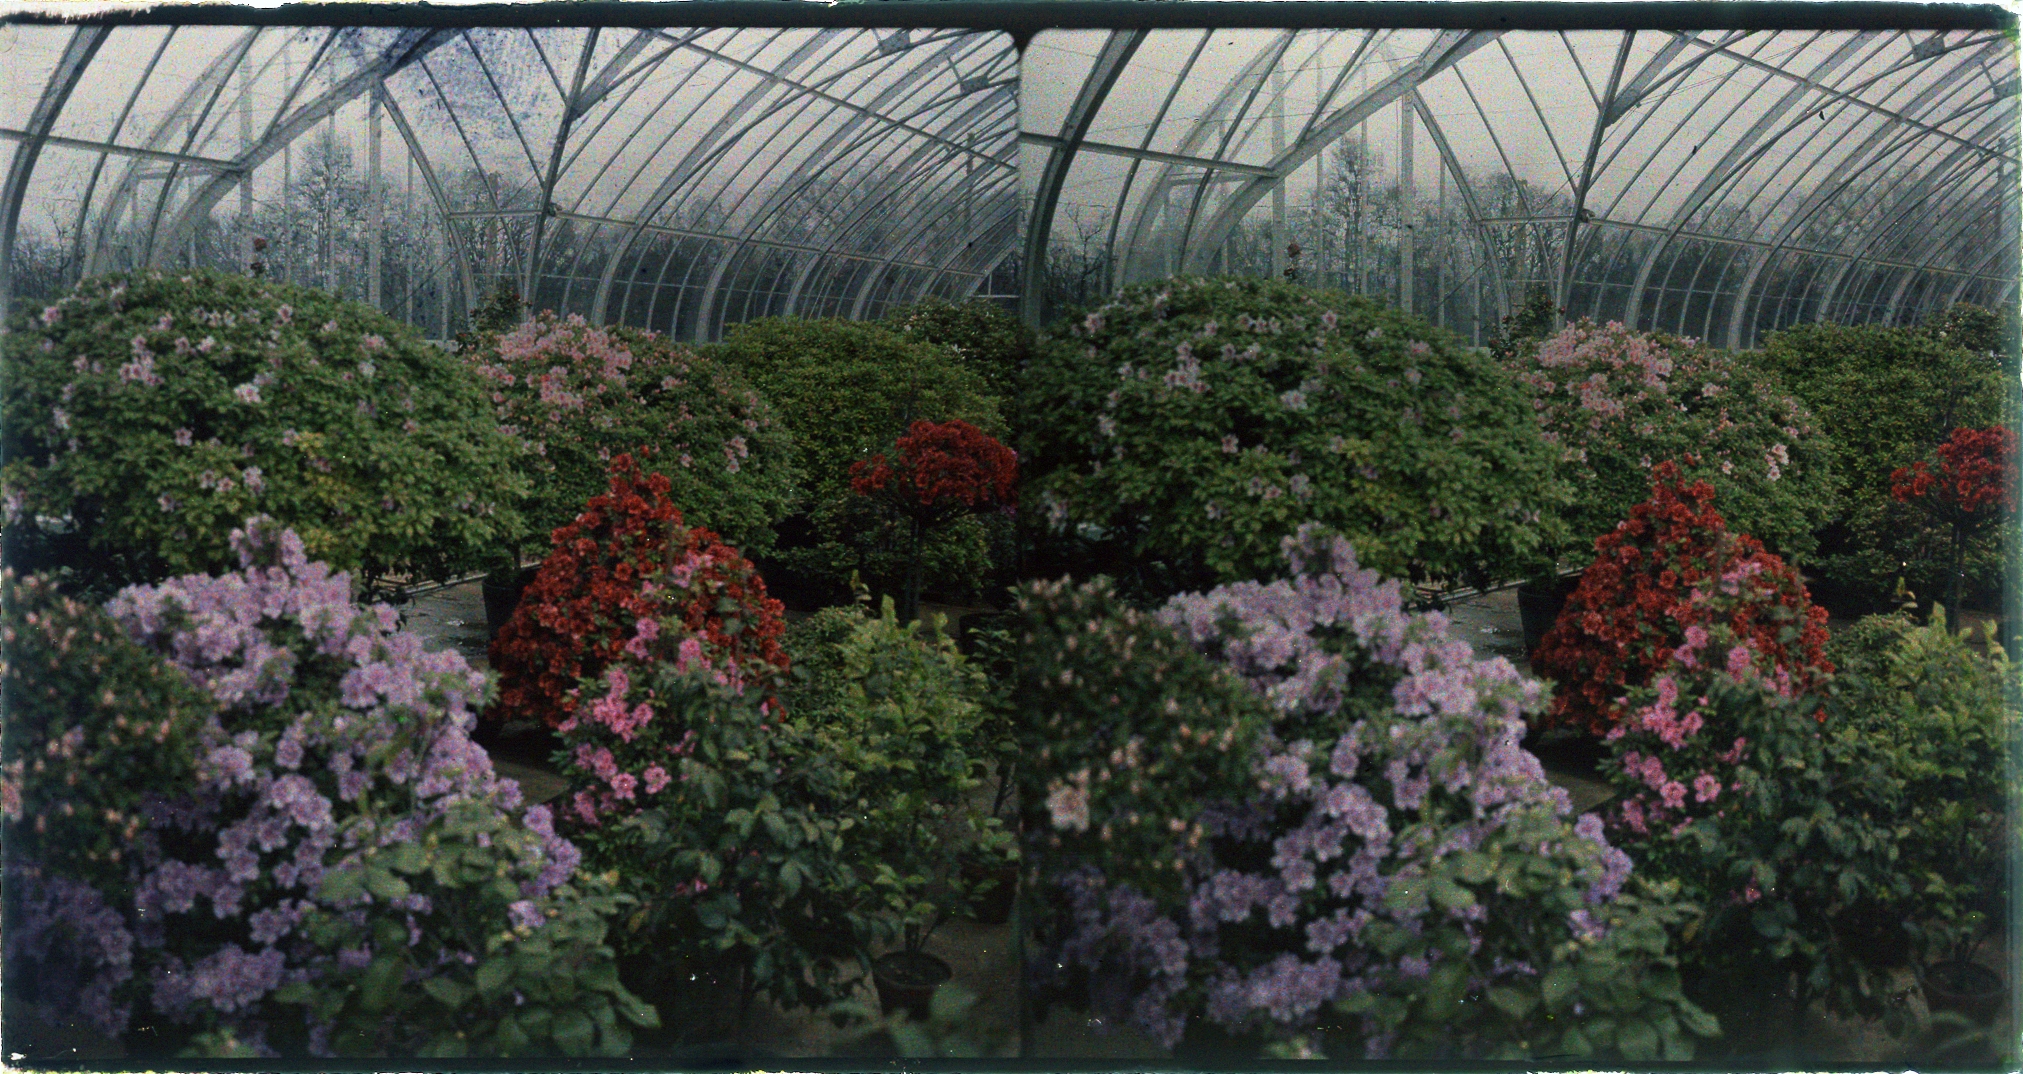 Stereoview of flowers in the conservatory greenhouse of Longwood Gardens.